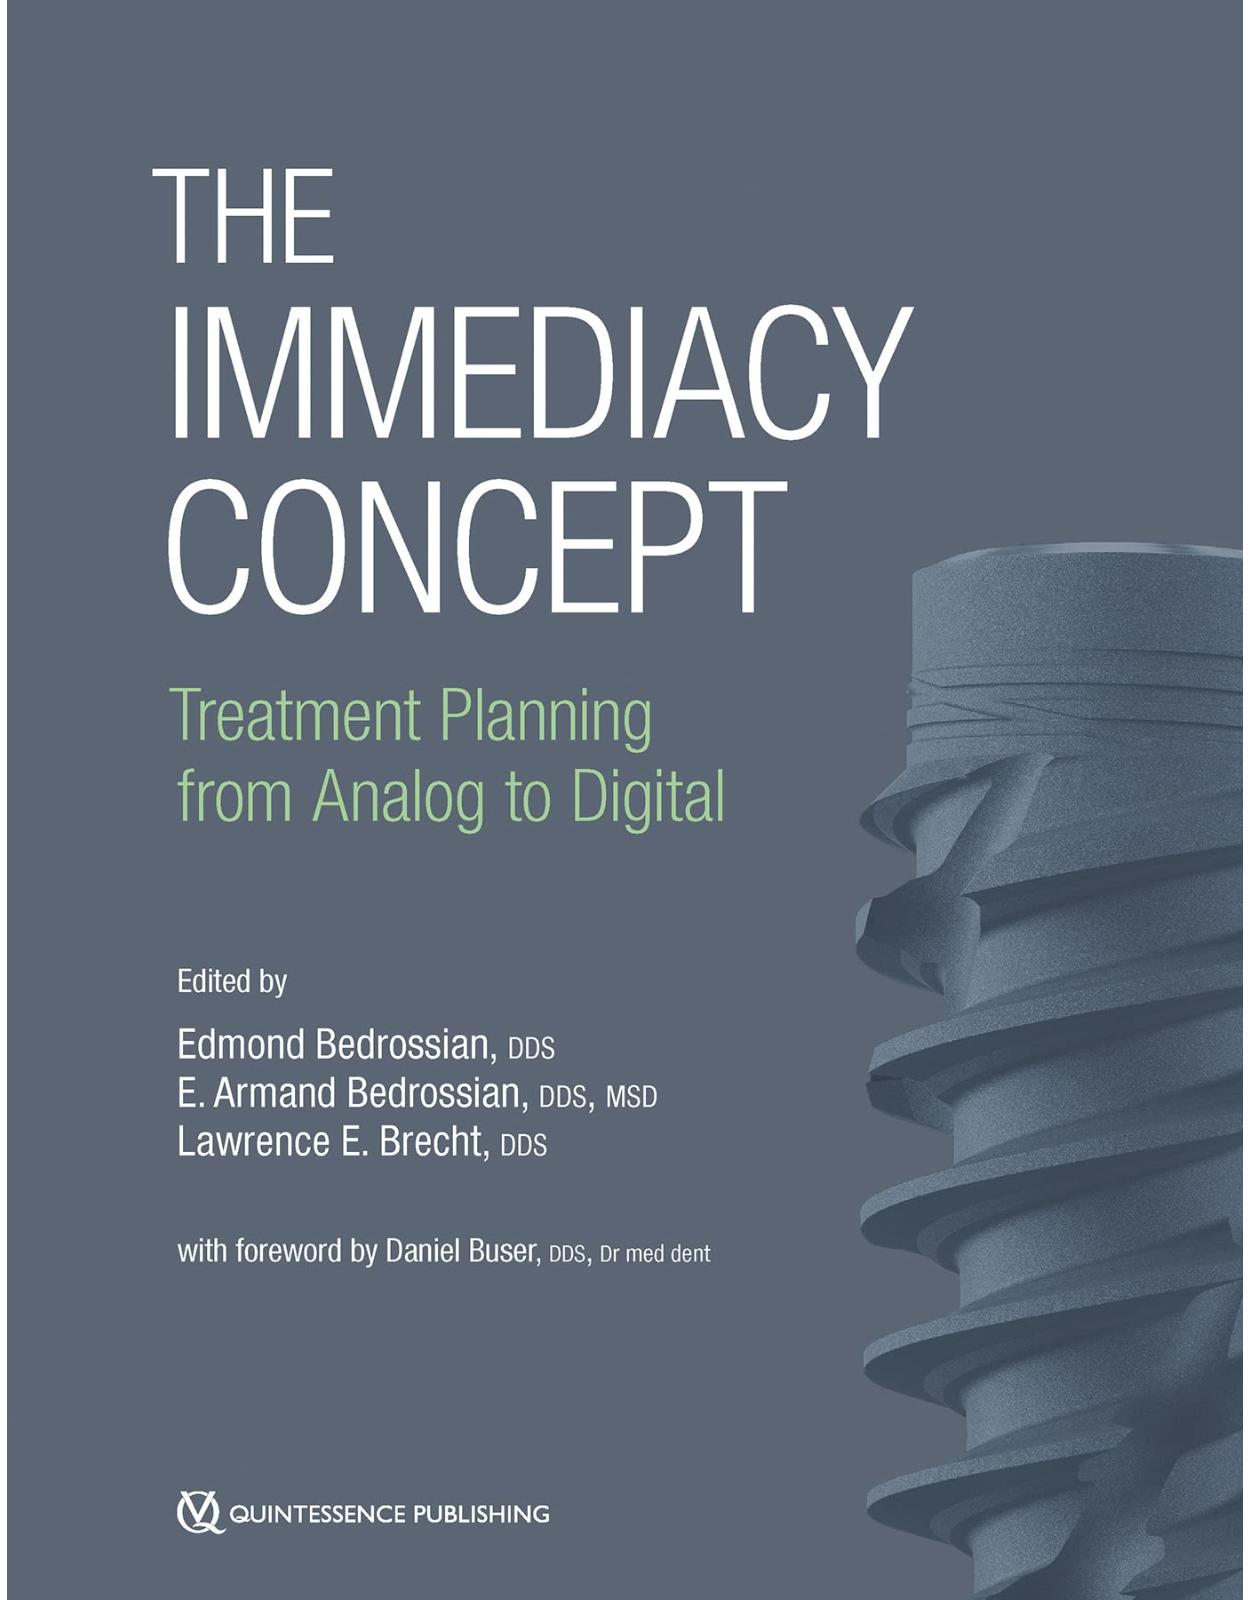 The Immediacy Concept